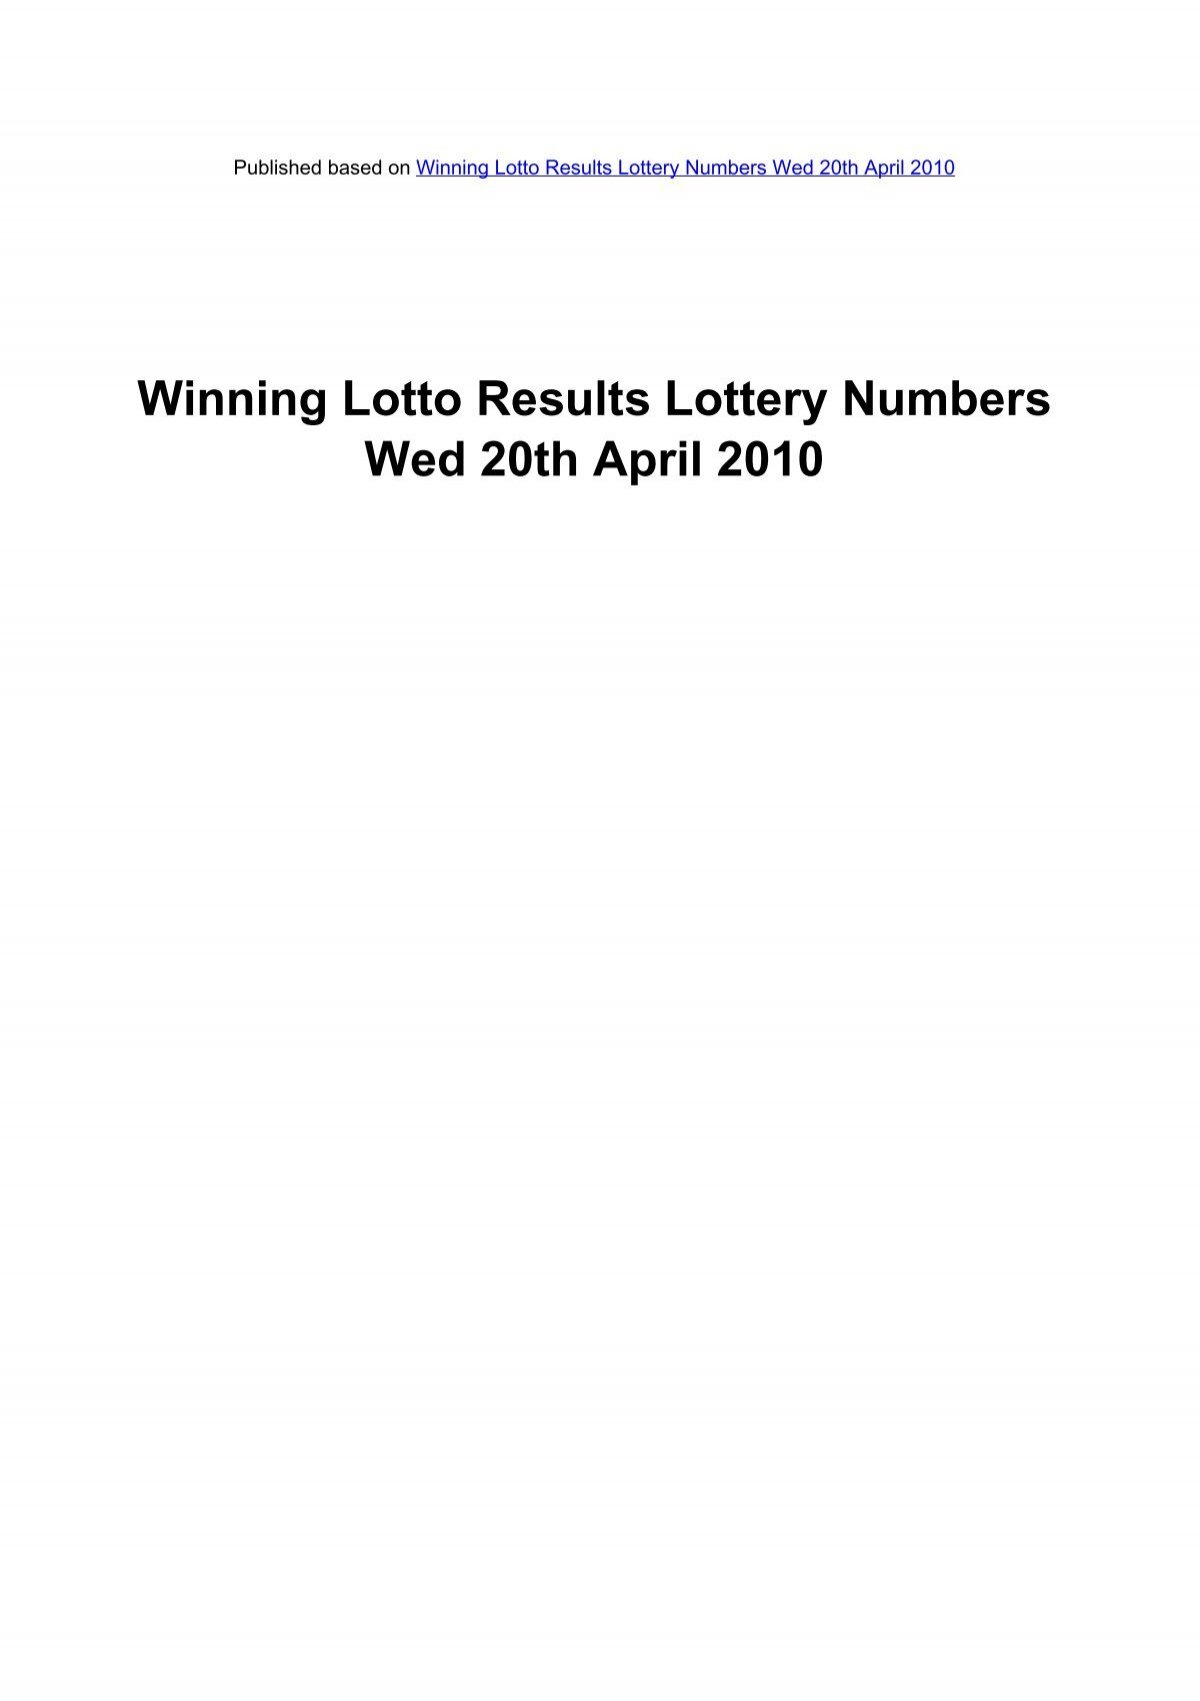 lotto numbers for april 20th